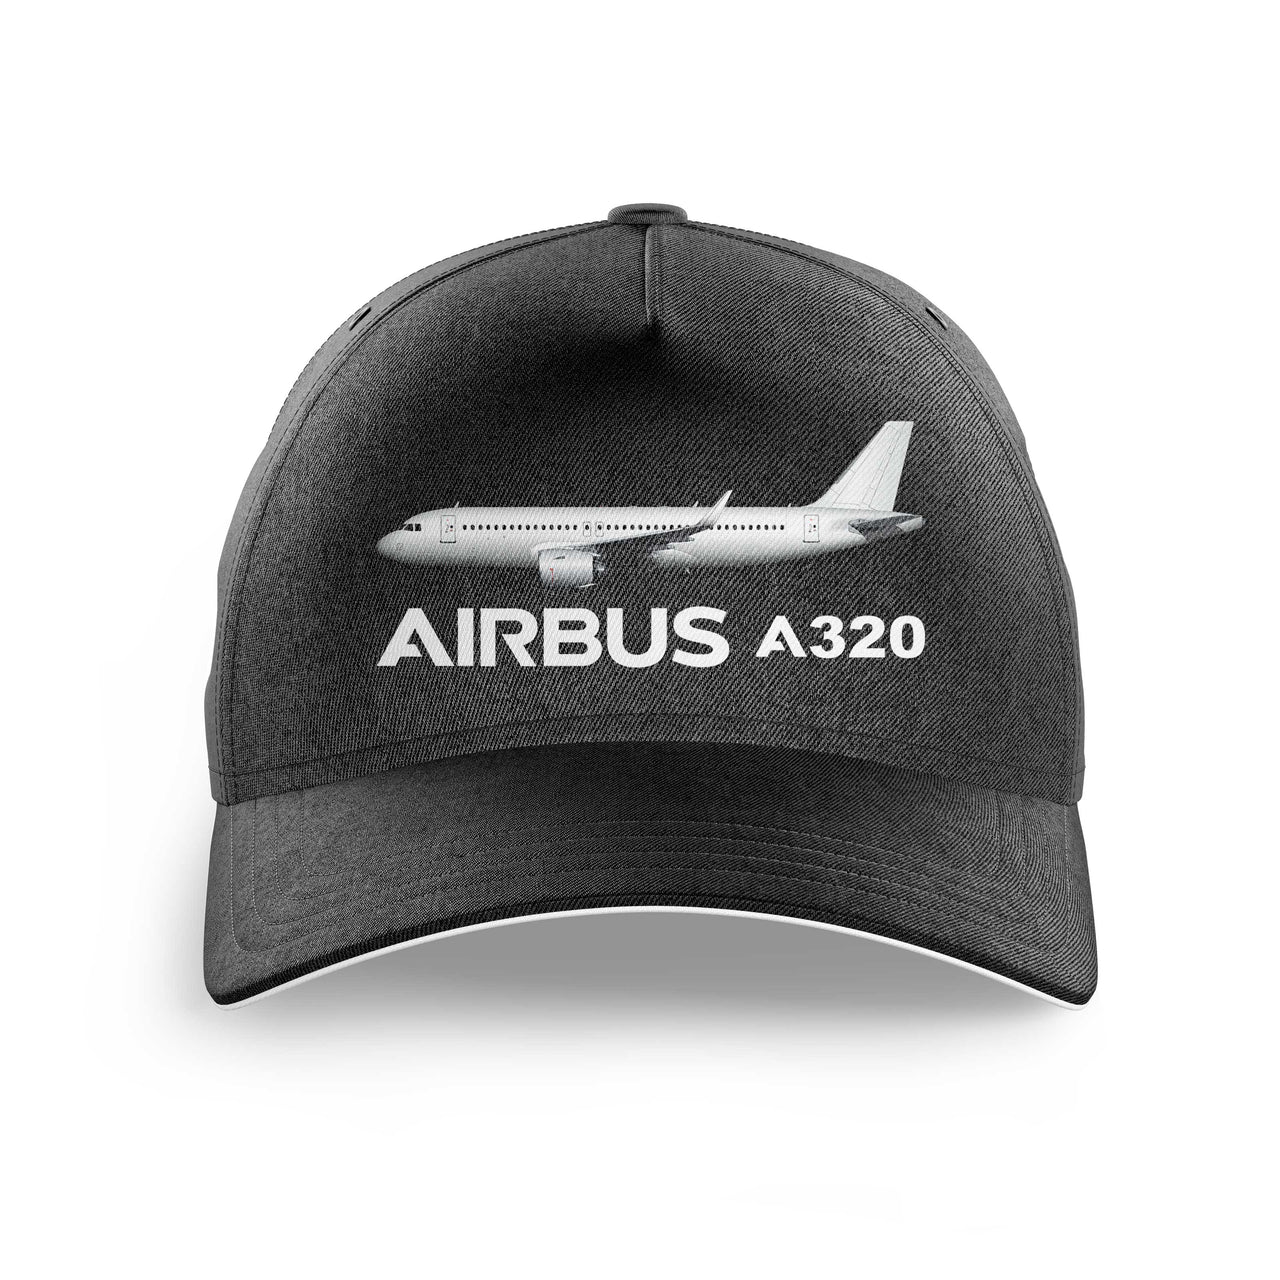 The Airbus A320 Printed Hats